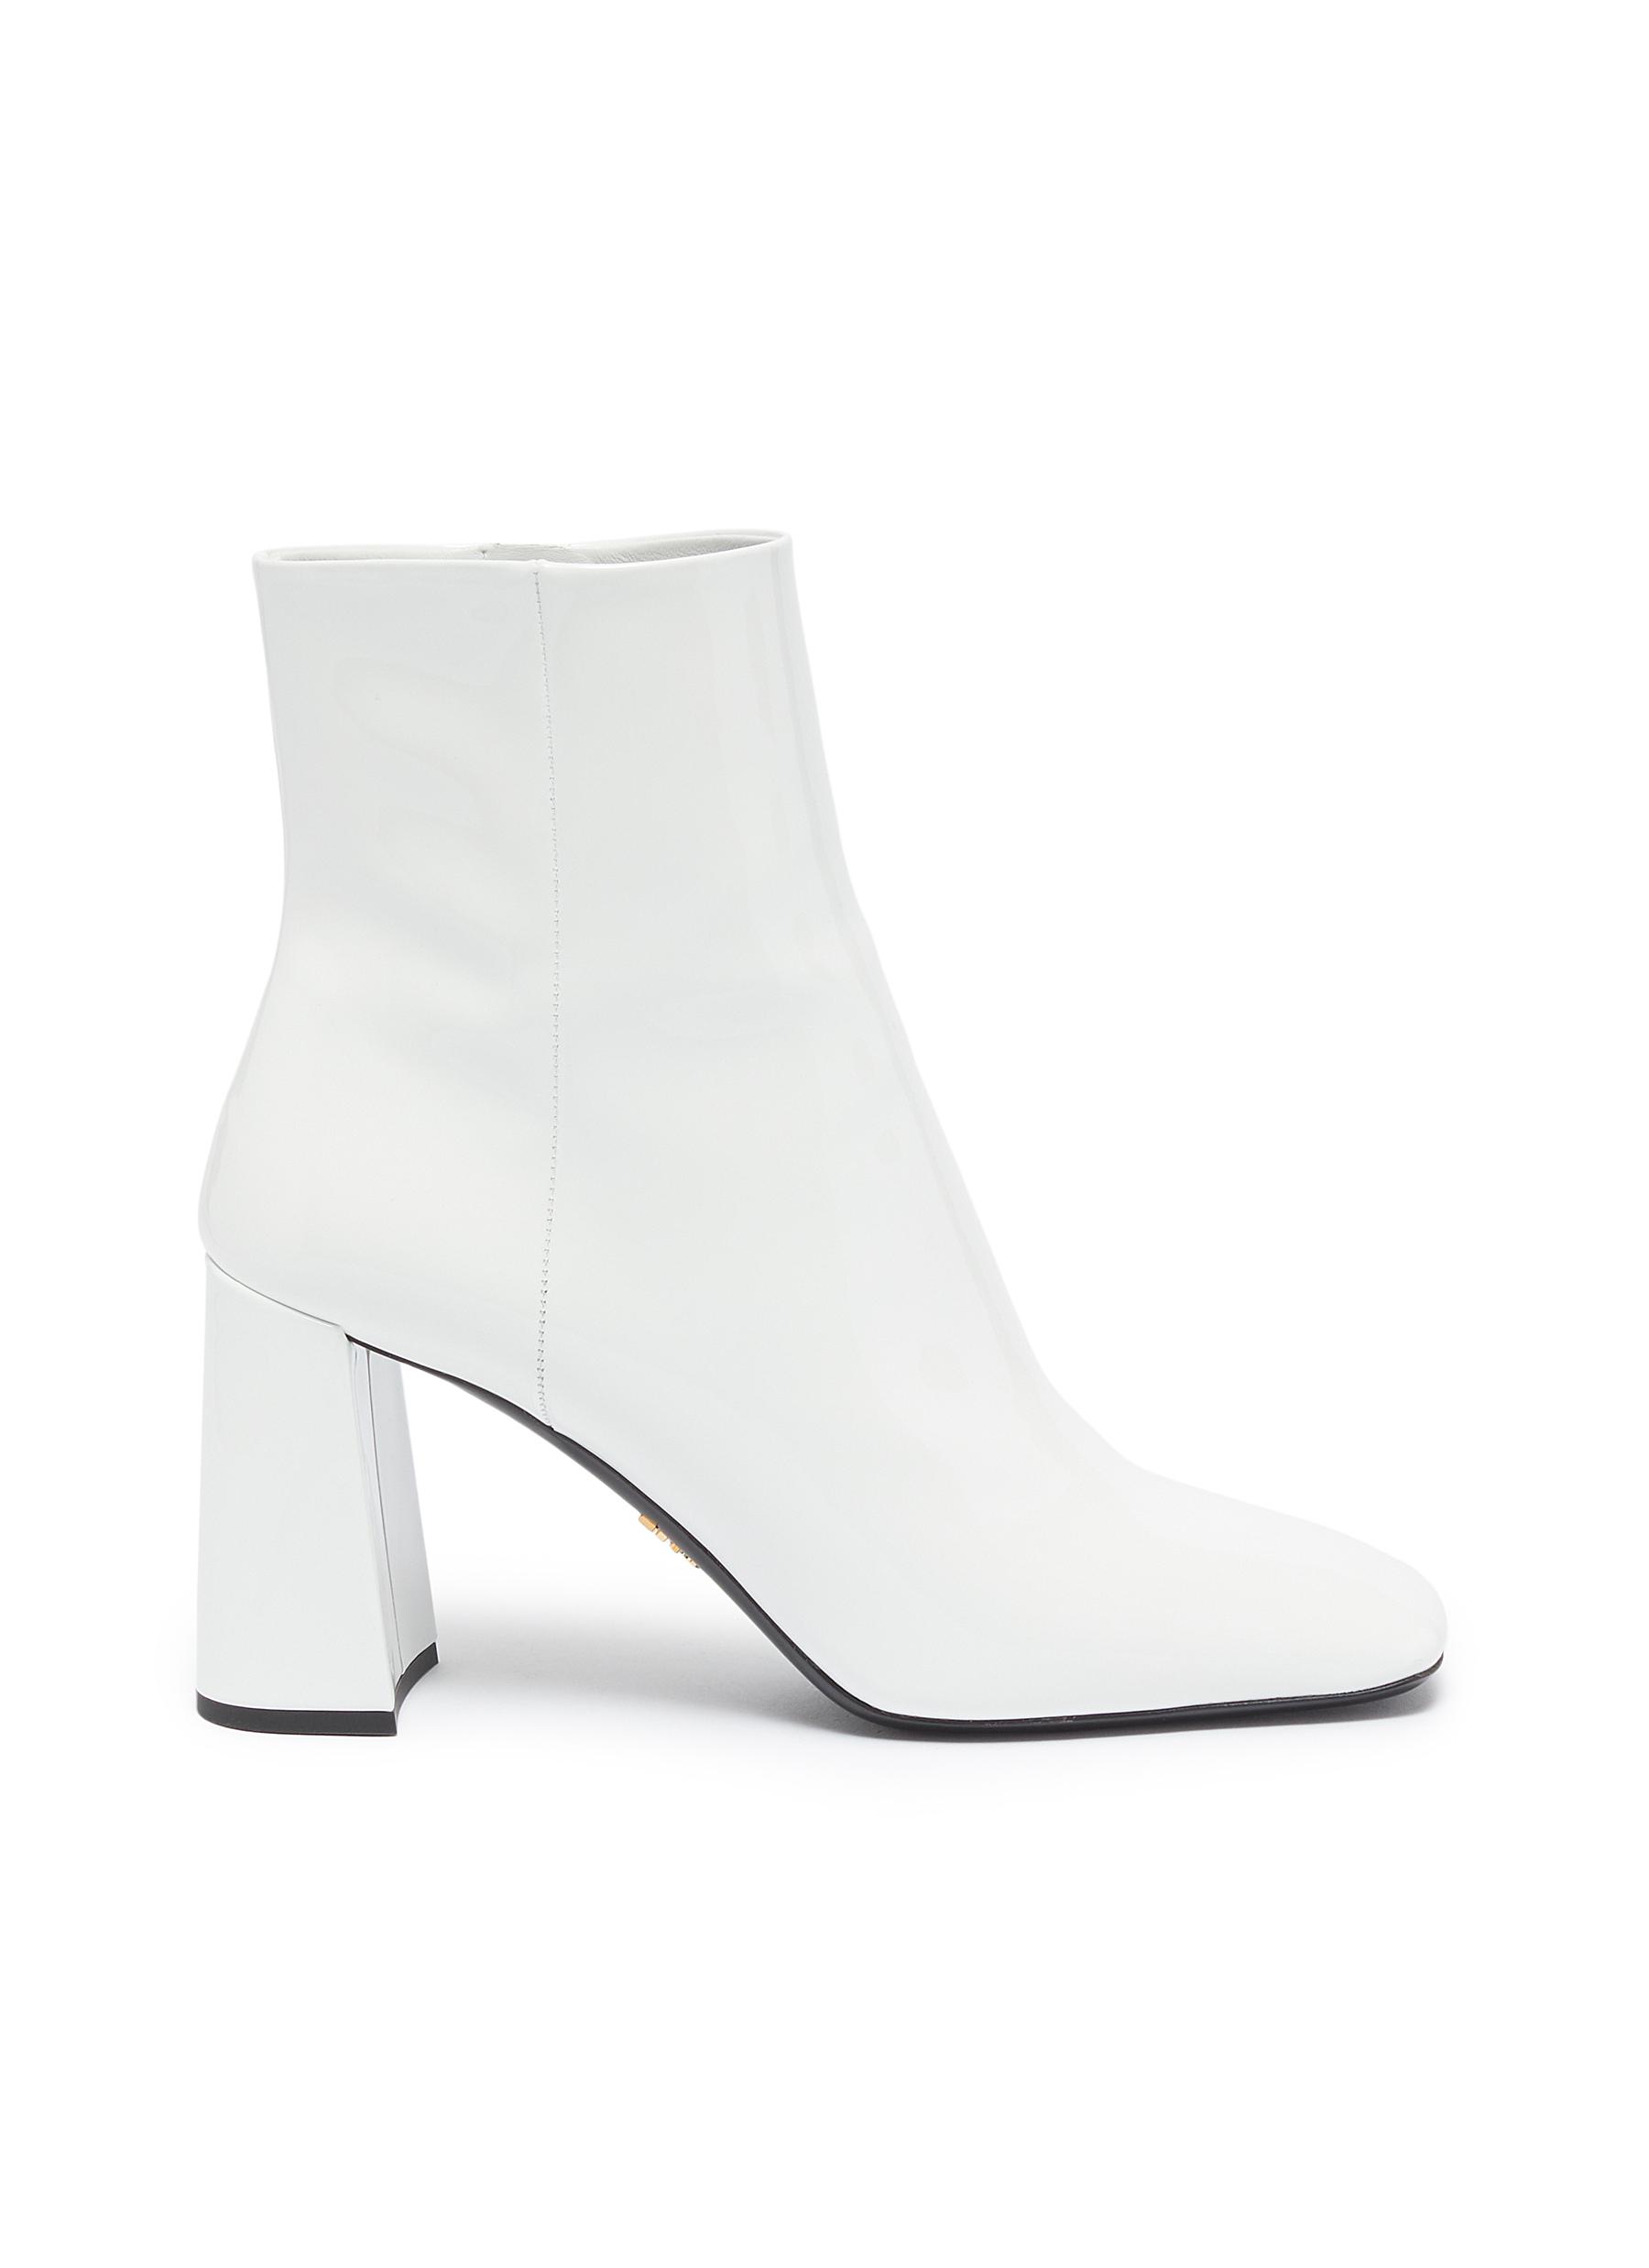 PRADA | Patent leather ankle boots 